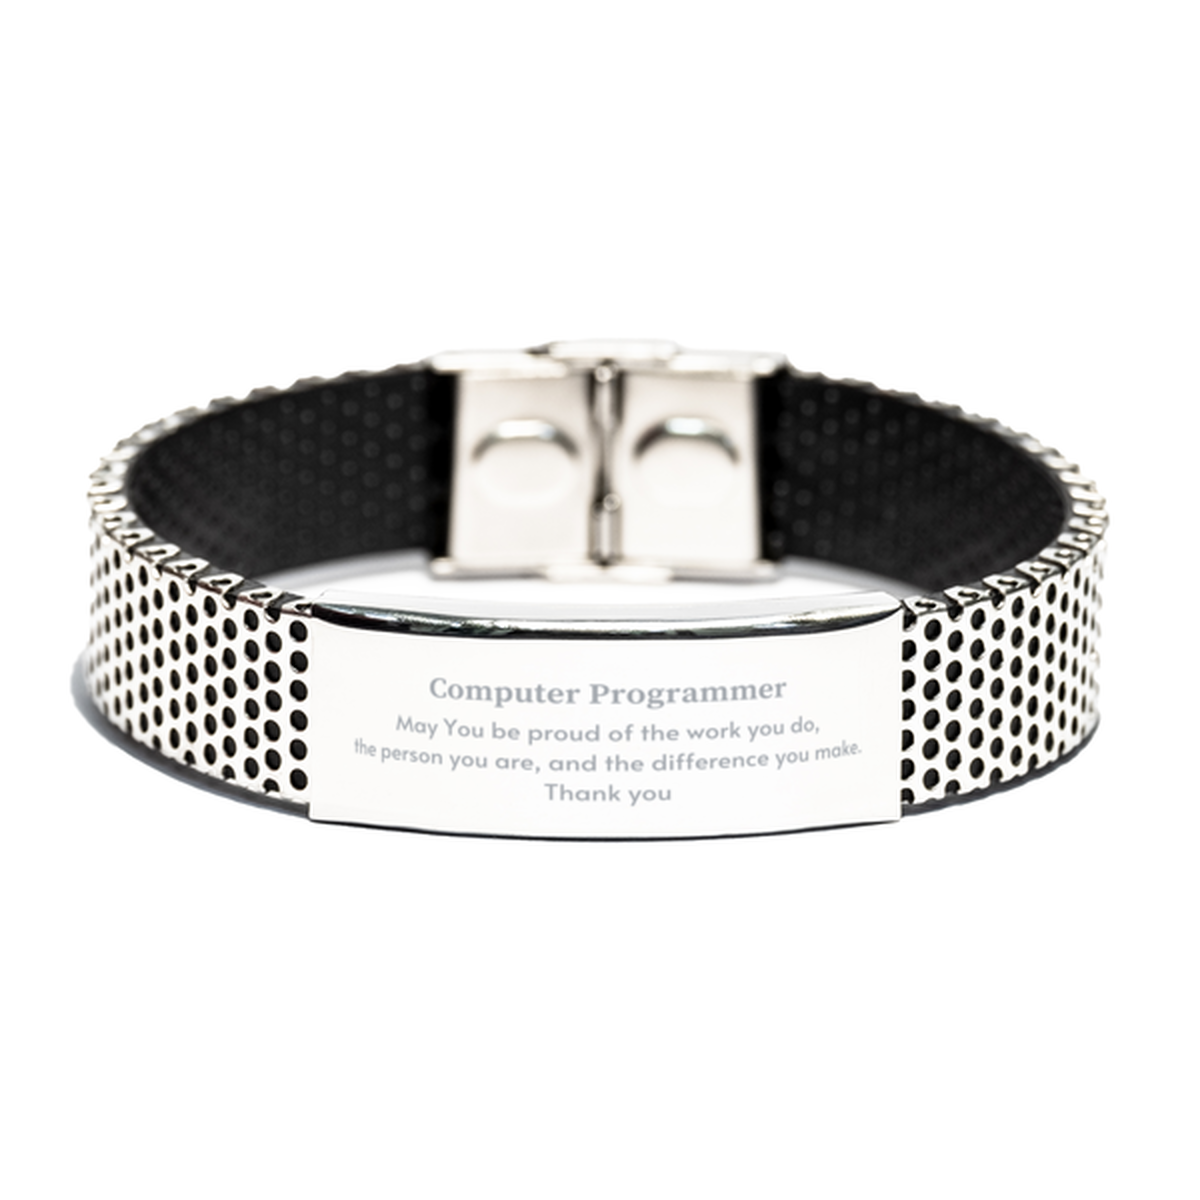 Heartwarming Stainless Steel Bracelet Retirement Coworkers Gifts for Computer Programmer, Computer Programmer May You be proud of the work you do, the person you are Gifts for Boss Men Women Friends